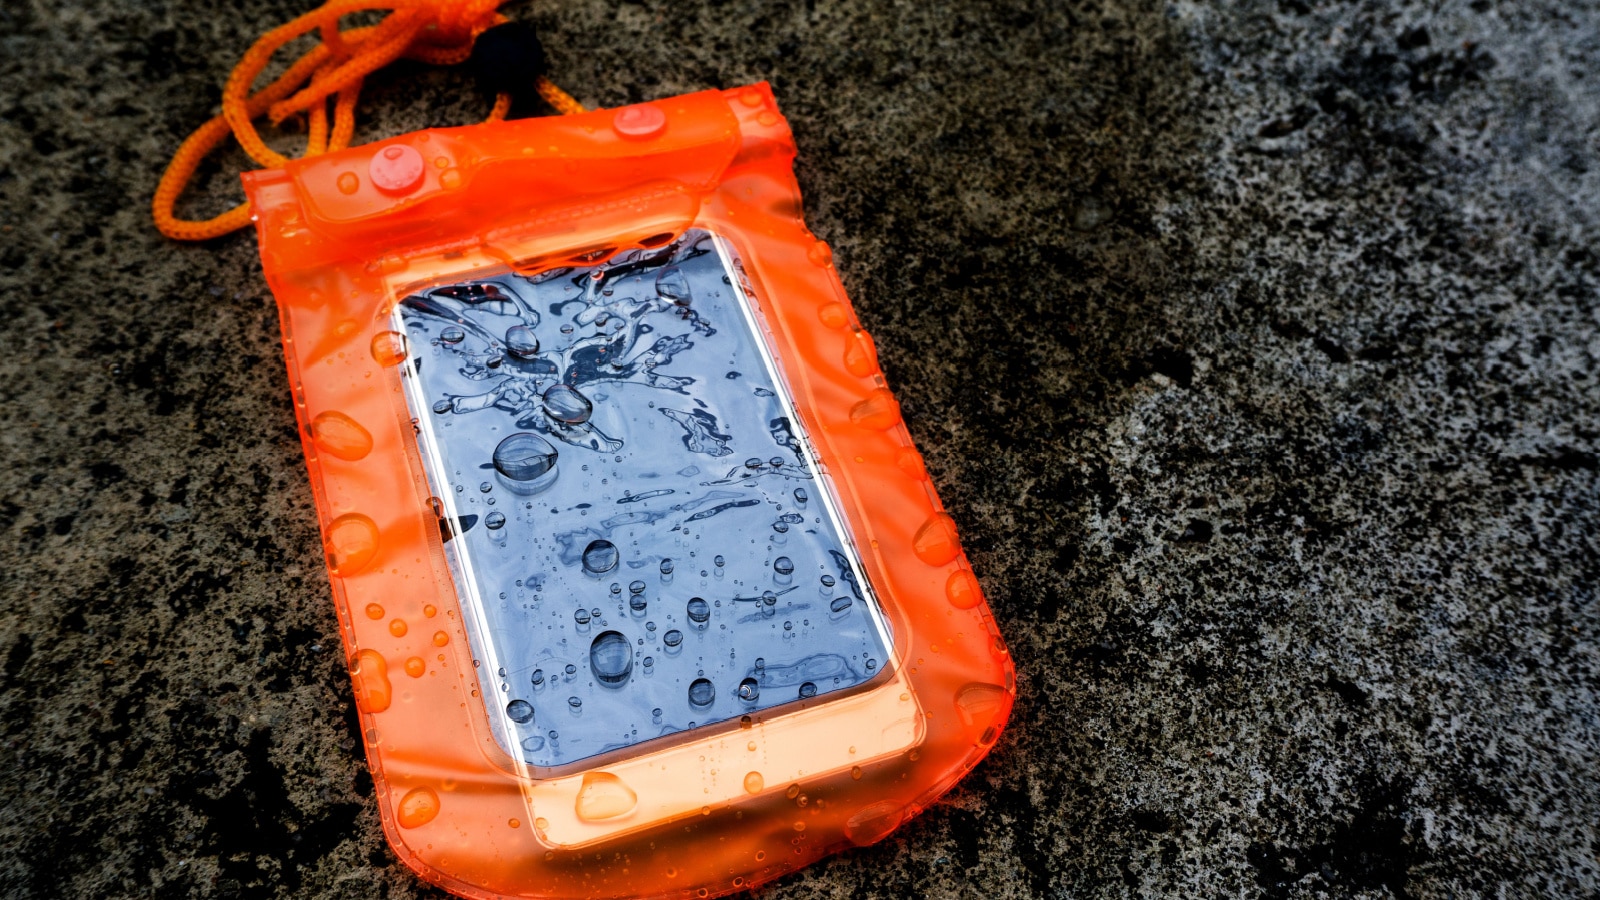 Orange waterproof mobile phone case with water droplets on grunge texture background.PVC zip lock bag protect mobile phone or important items from water.Concept for Songkran water festival in Thailand